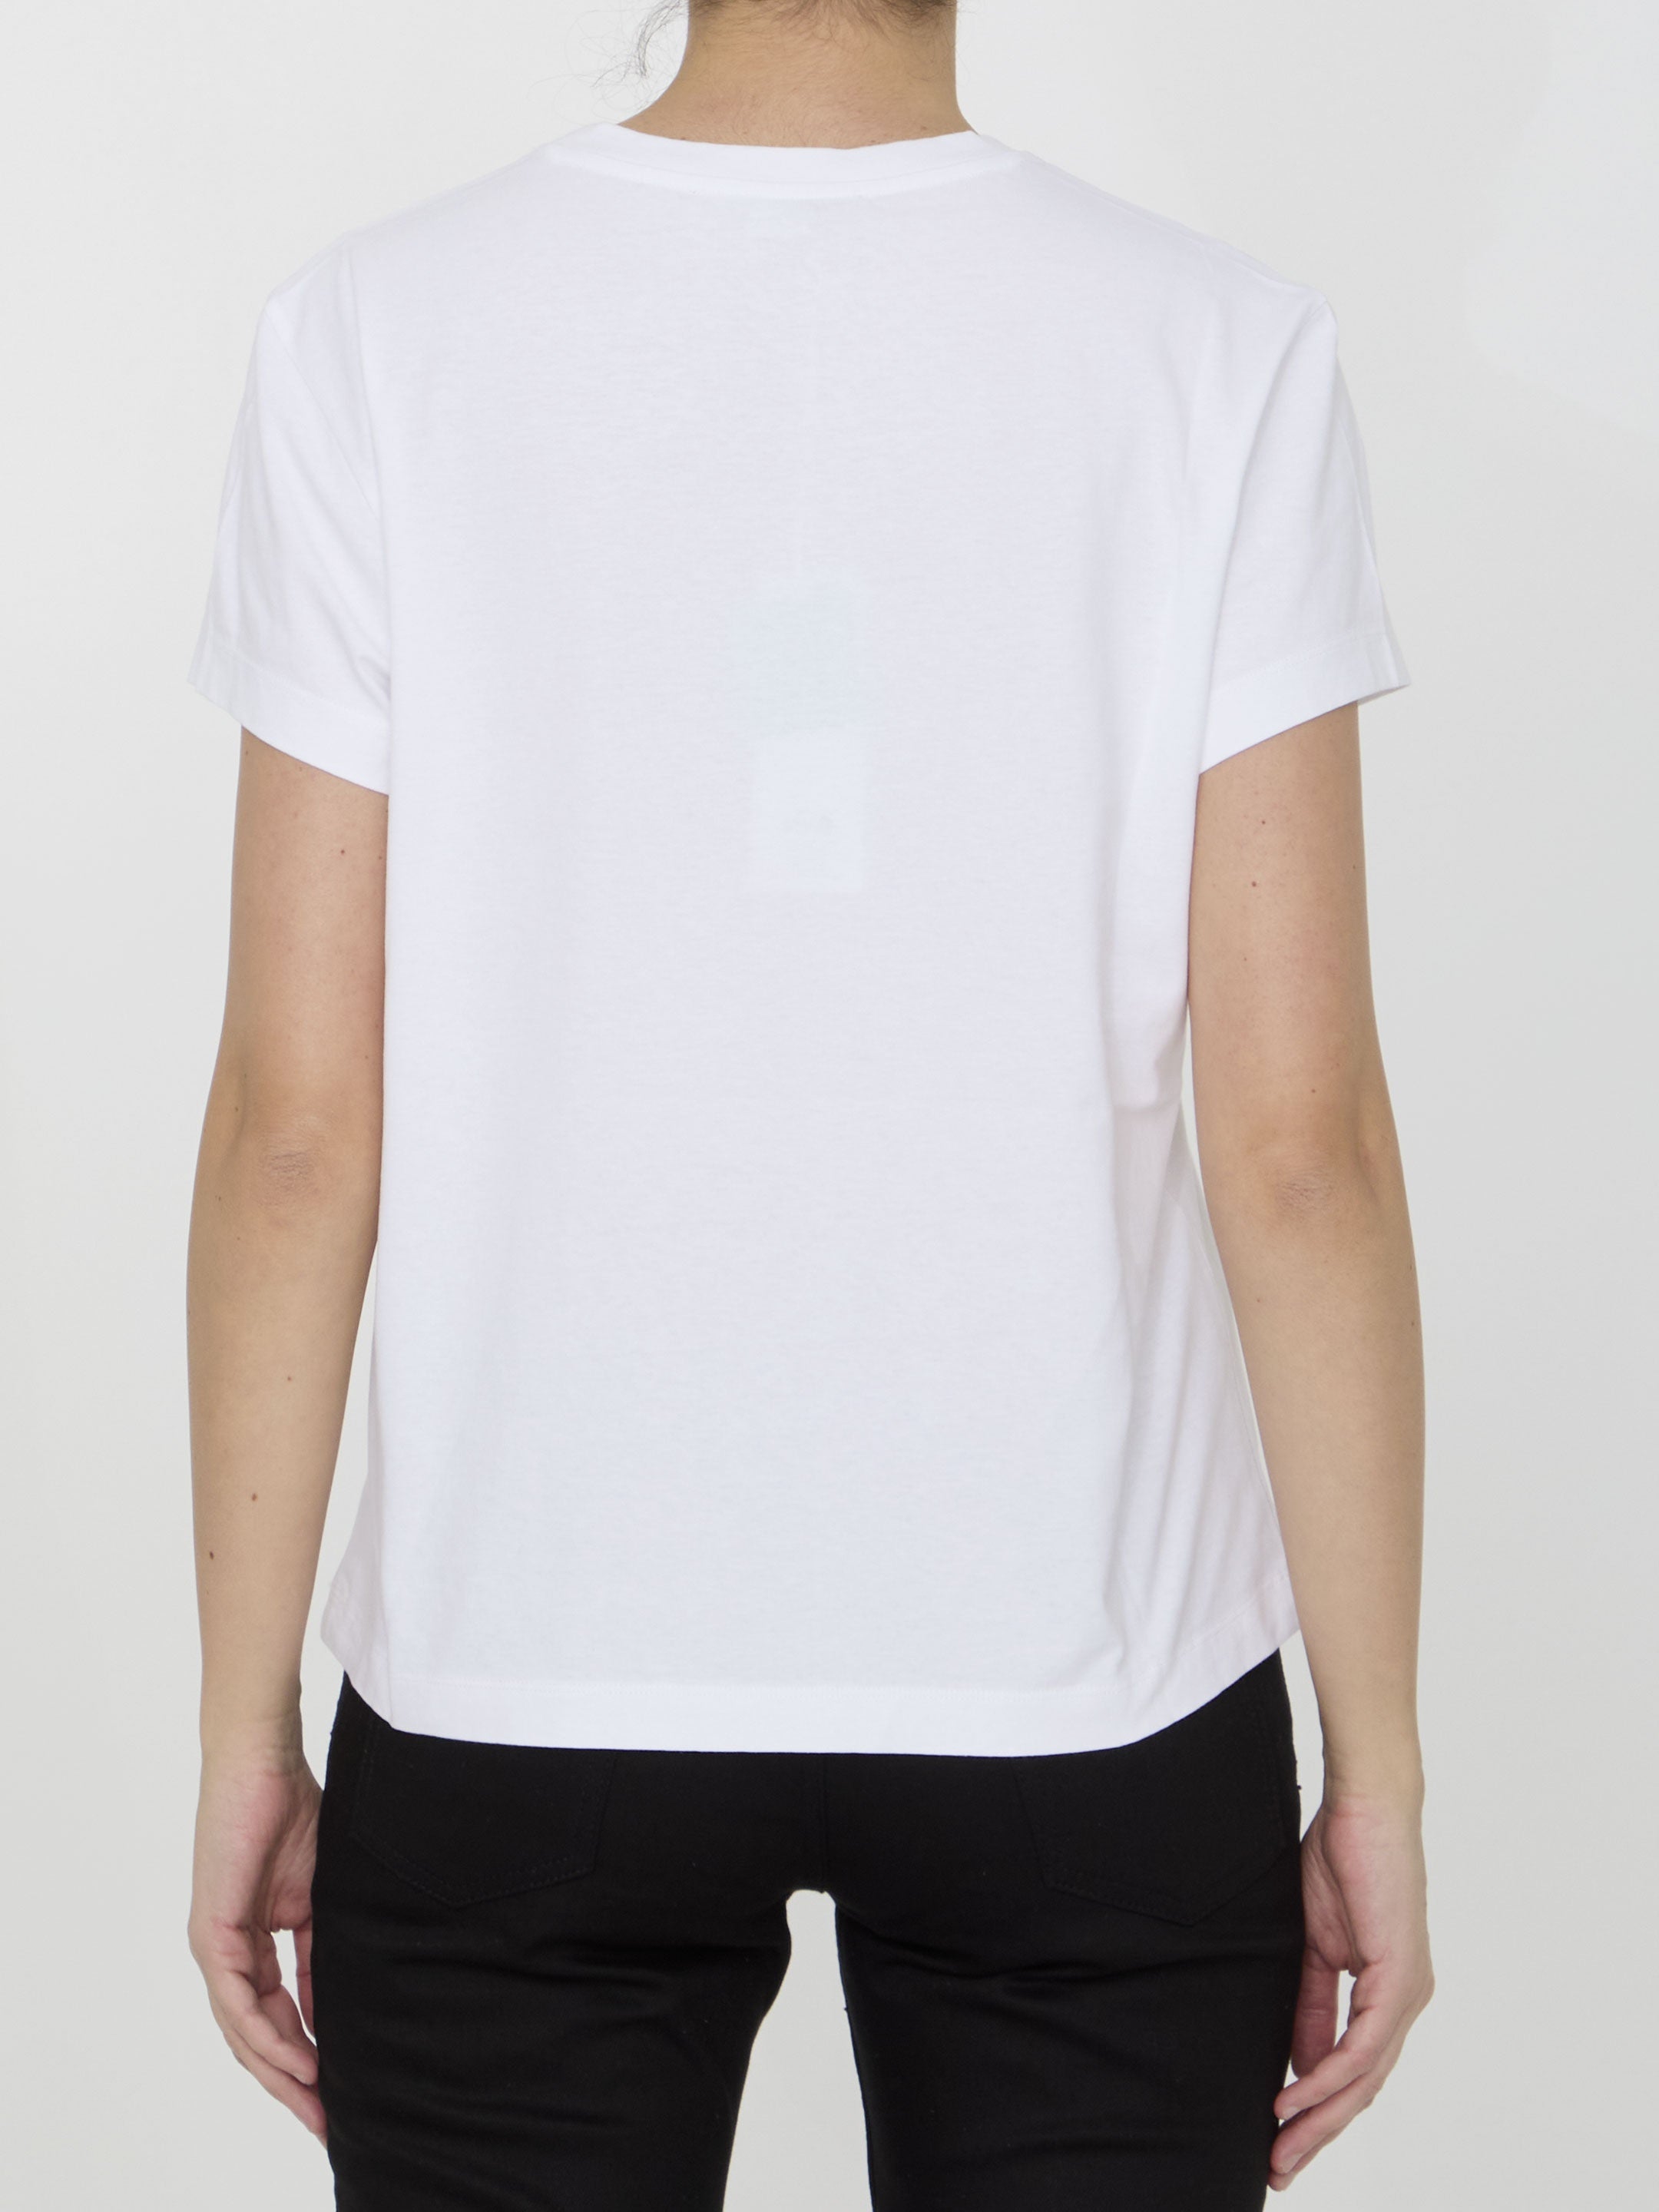 STELLA-MCCARTNEY-OUTLET-SALE-Embroidered-t-shirt-Shirts-ARCHIVE-COLLECTION-4.jpg